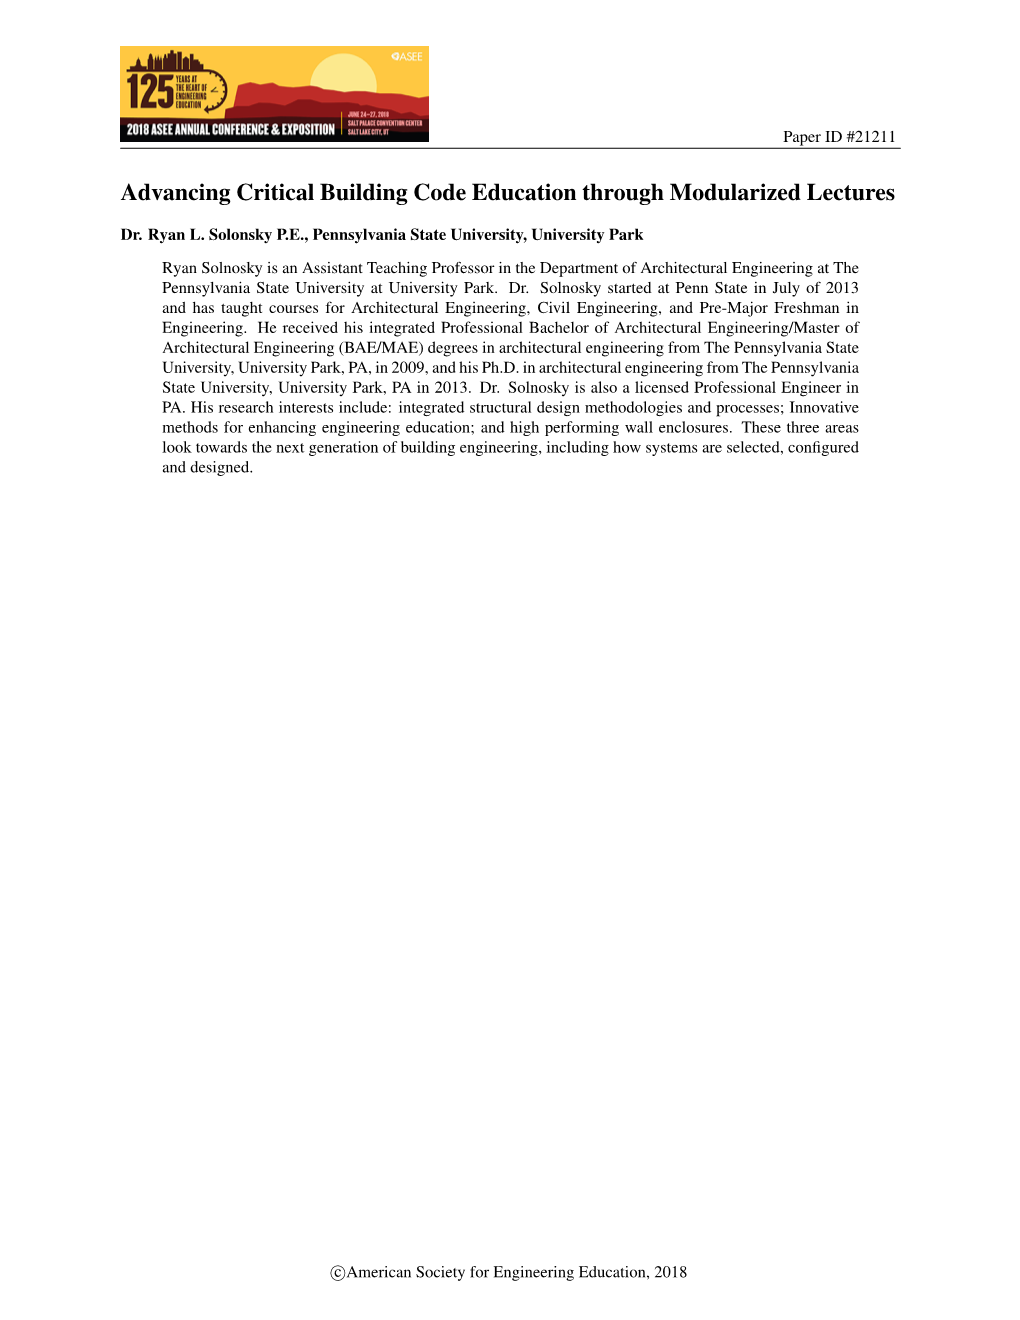 Advancing Critical Building Code Education Through Modularized Lectures